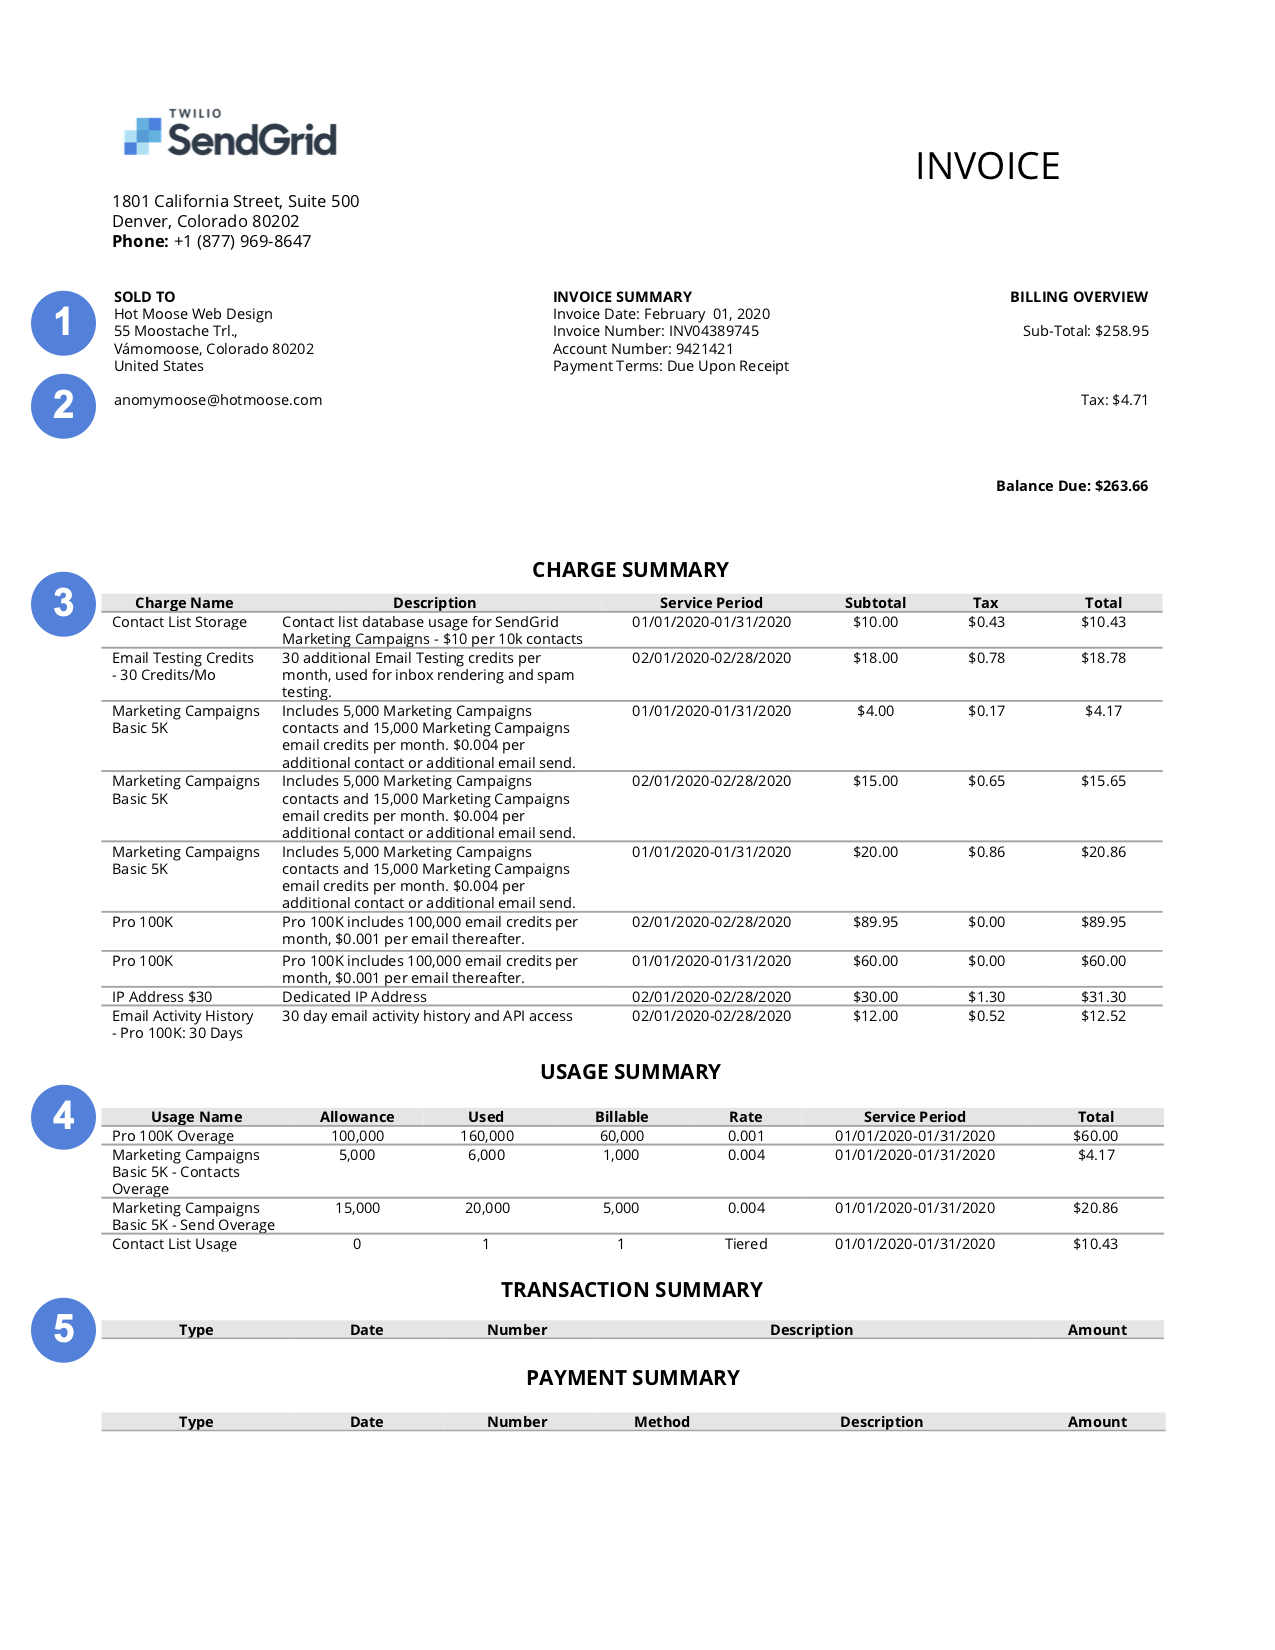 An invoice example.